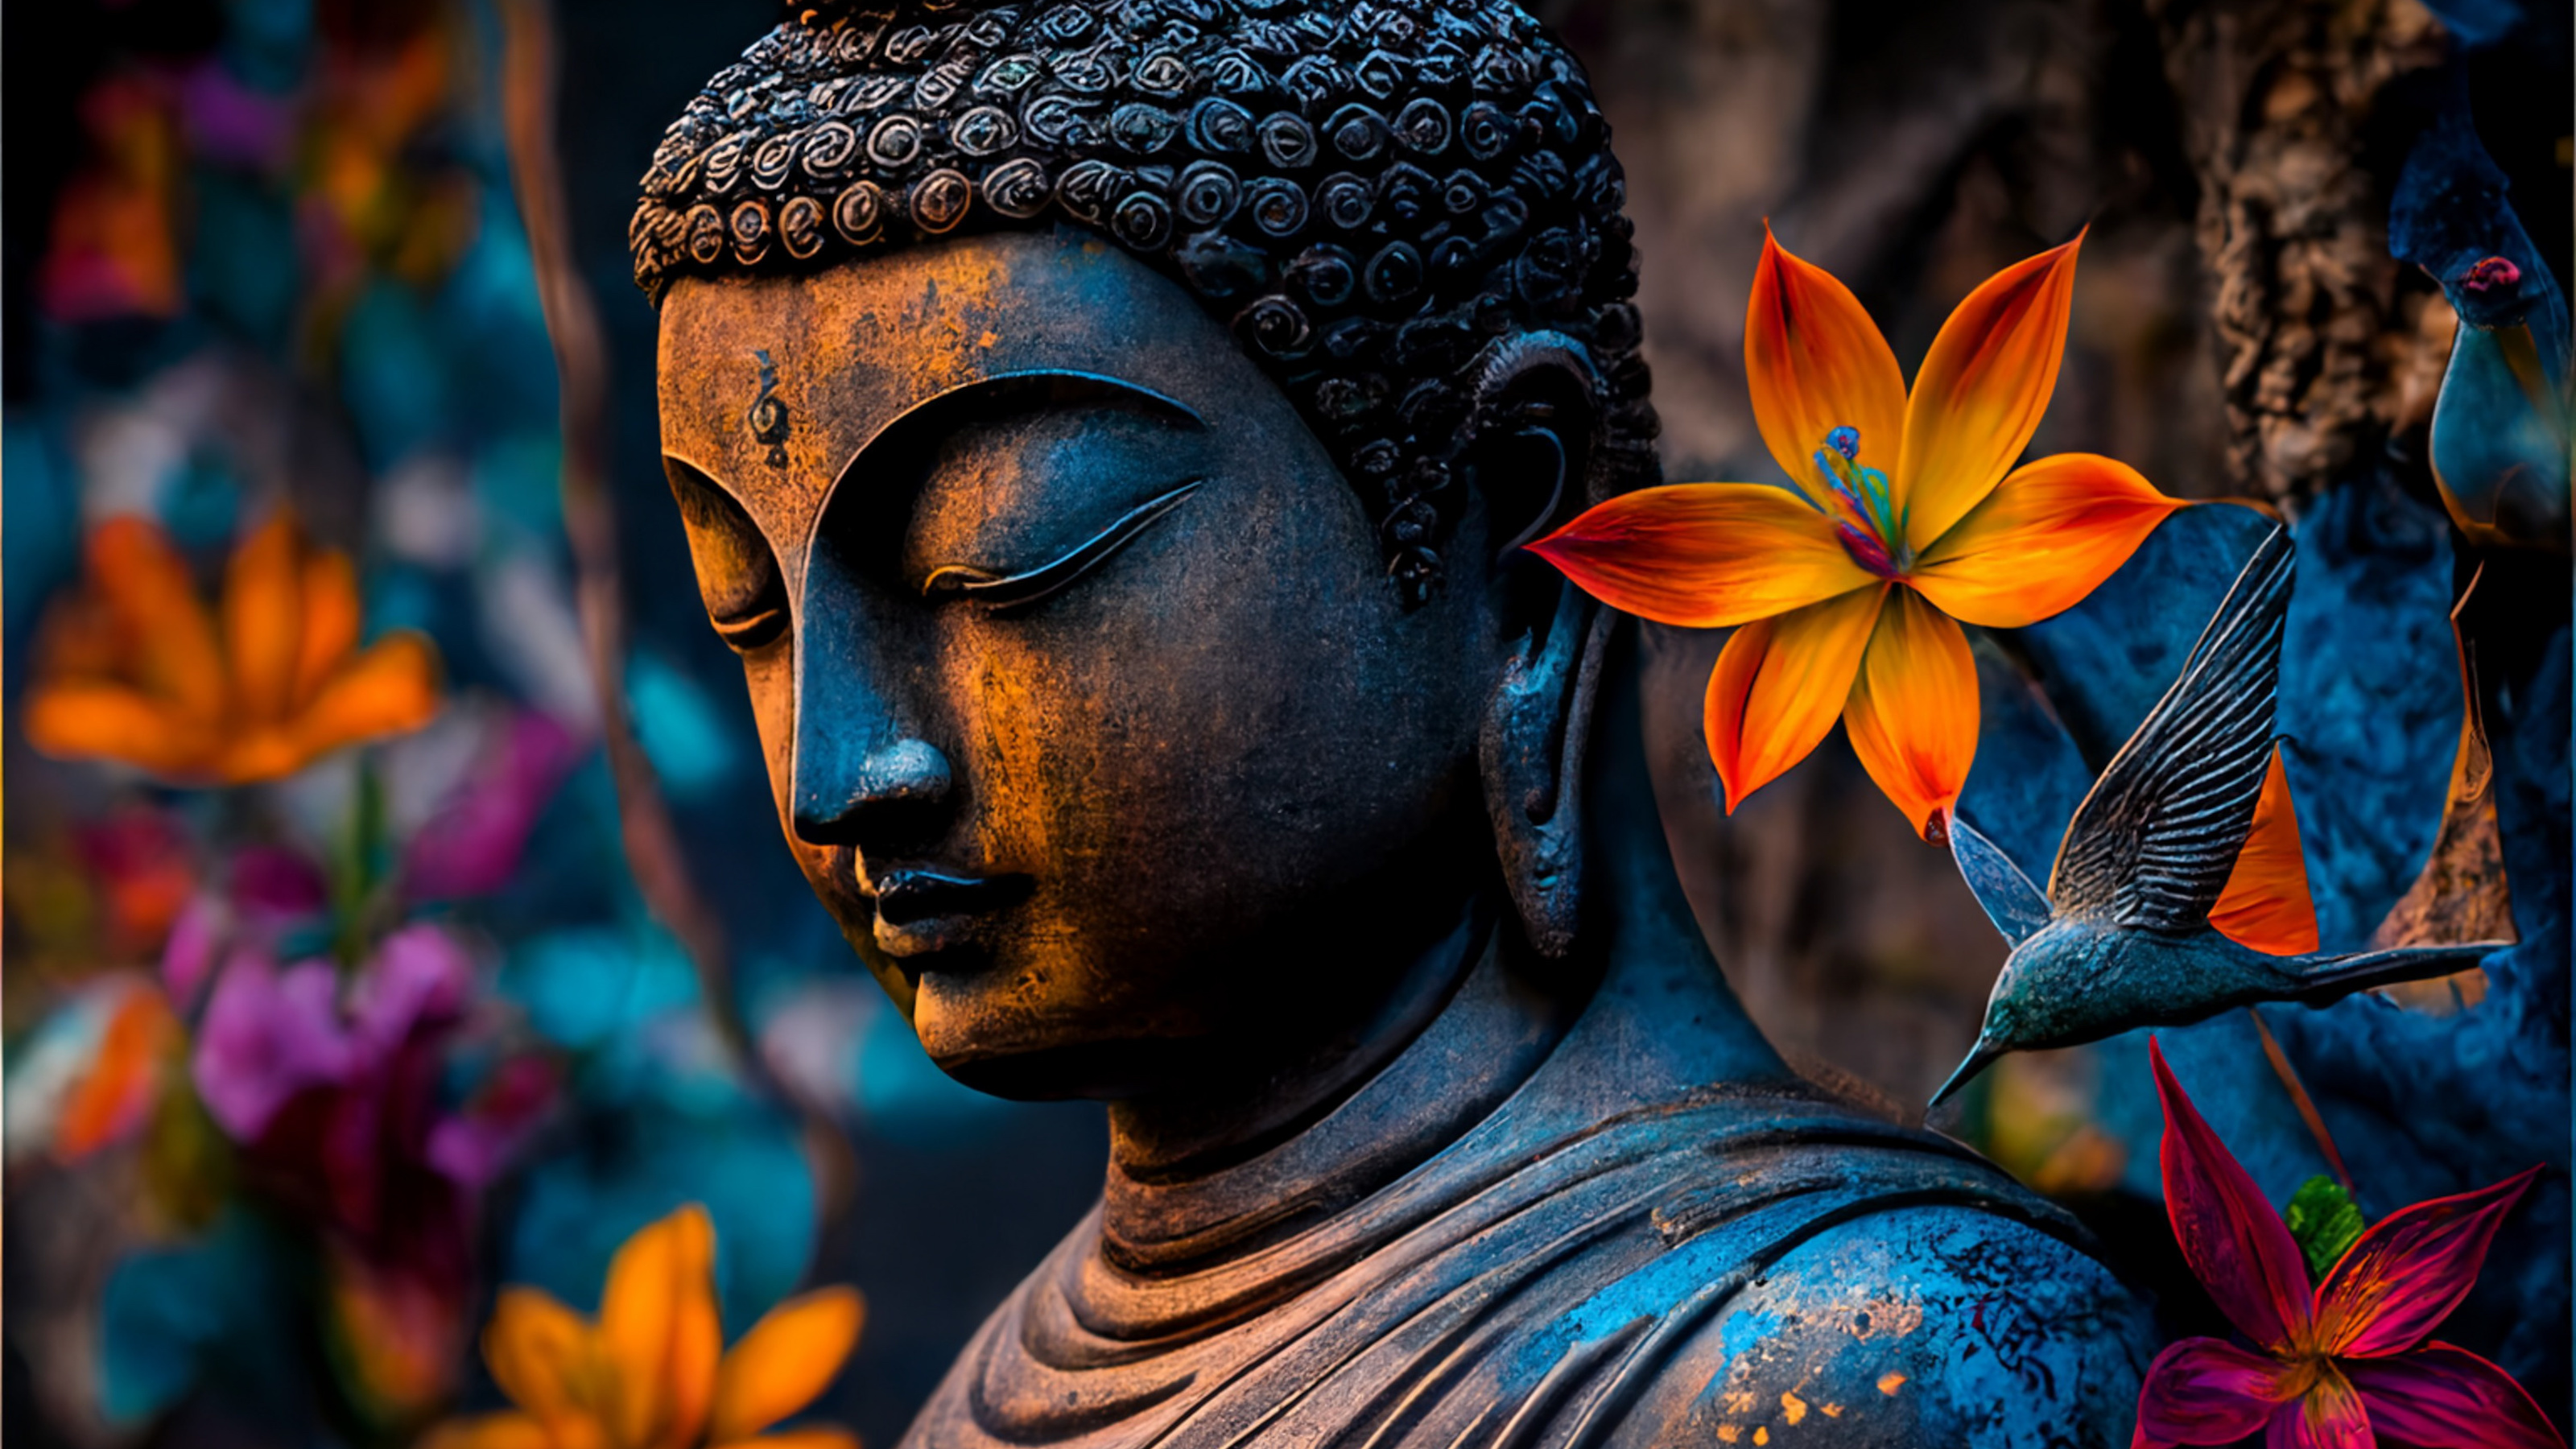 Buddhism's blueprint to conquer suffering - Big Think